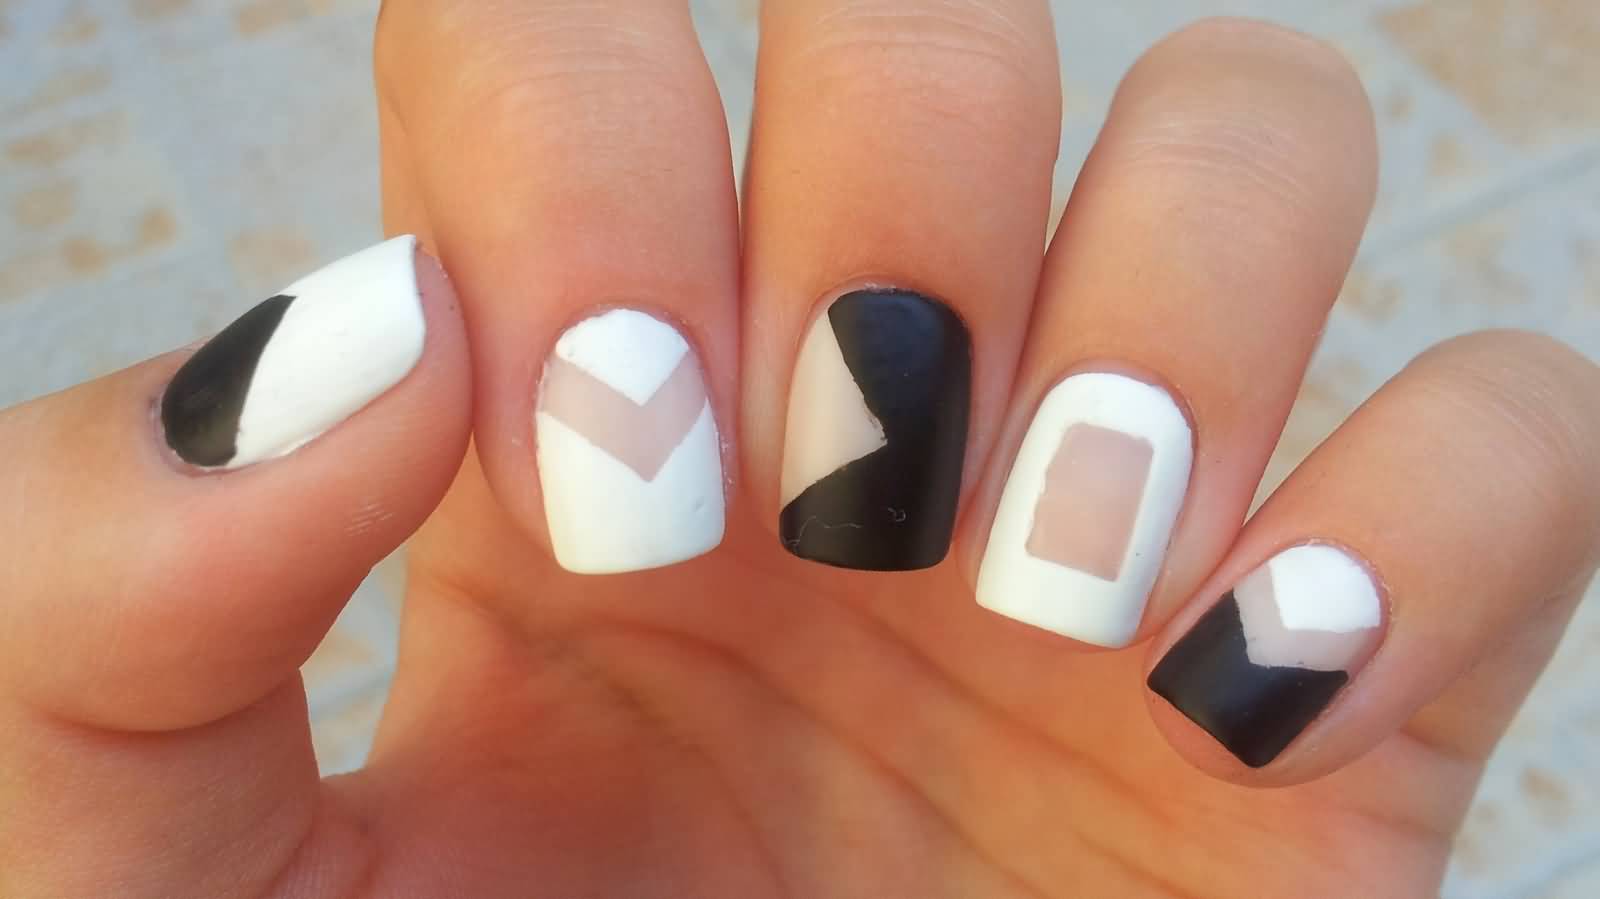 9. Ivory base for negative space nail art - wide 3